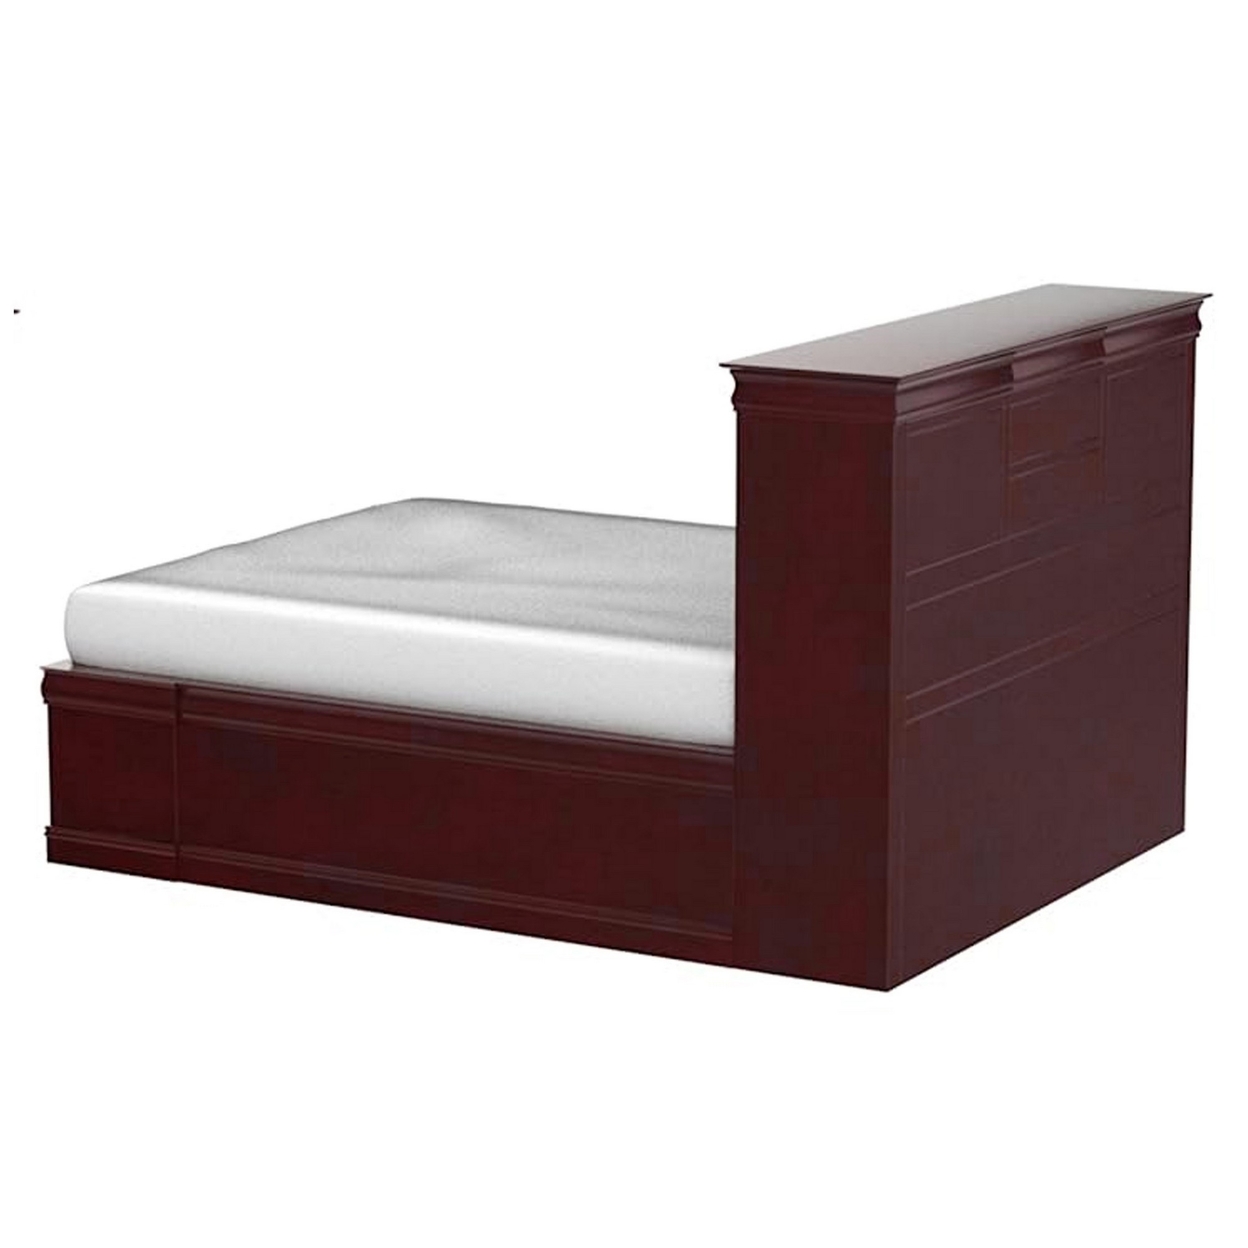 Elegant And Spacious Queen Size Bed With Storage, Brown- Saltoro Sherpi